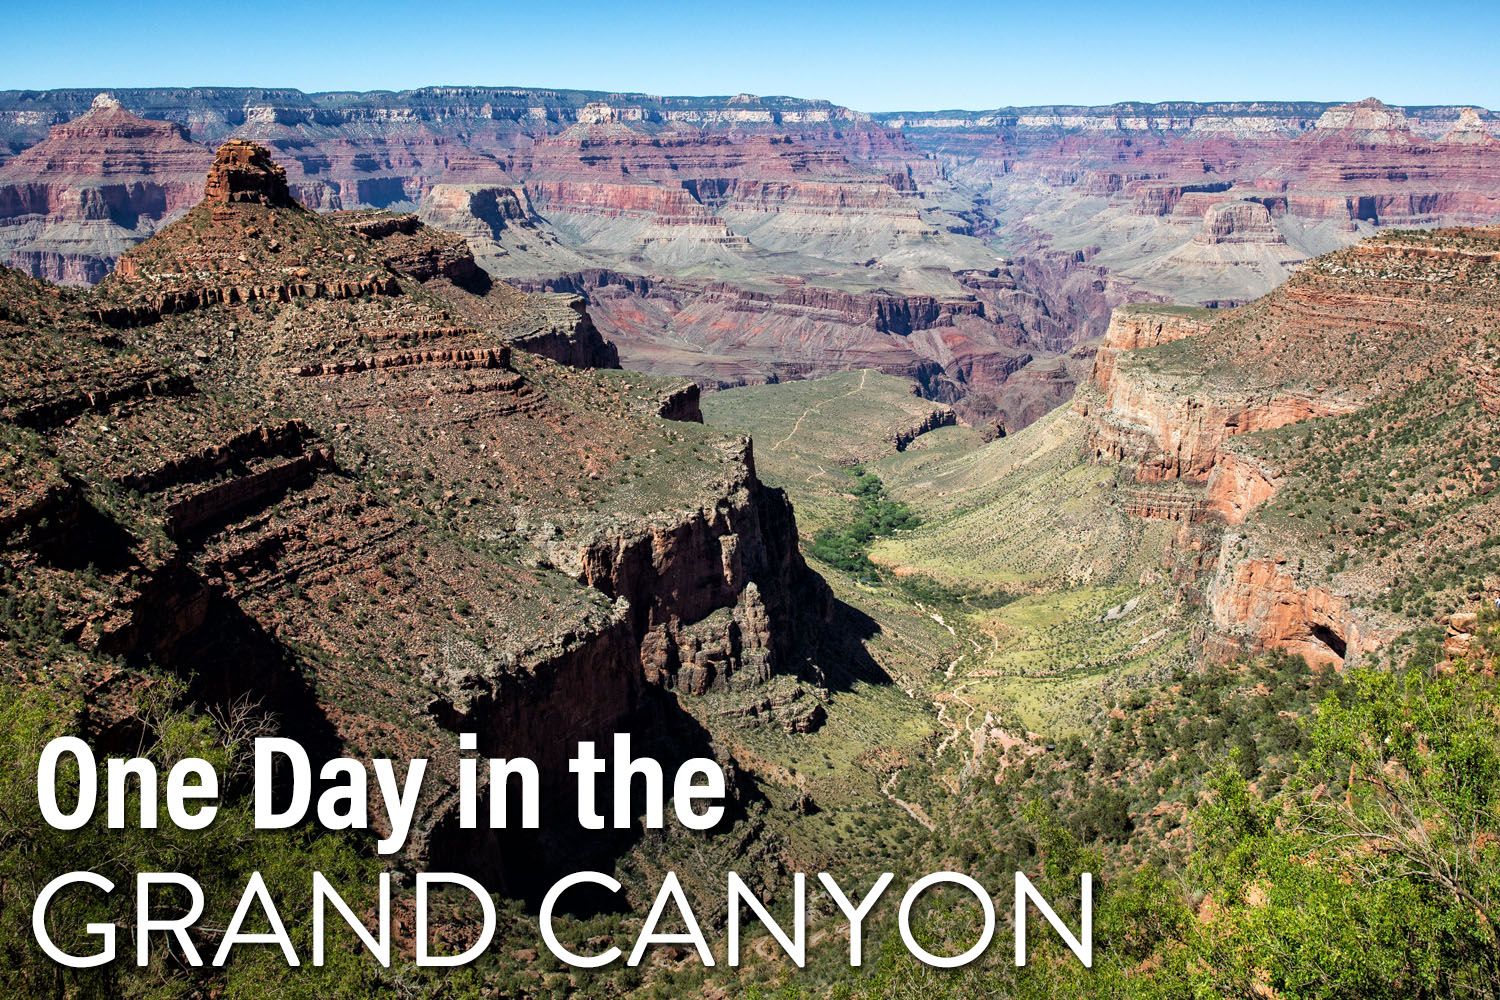 One Day in the Grand Canyon